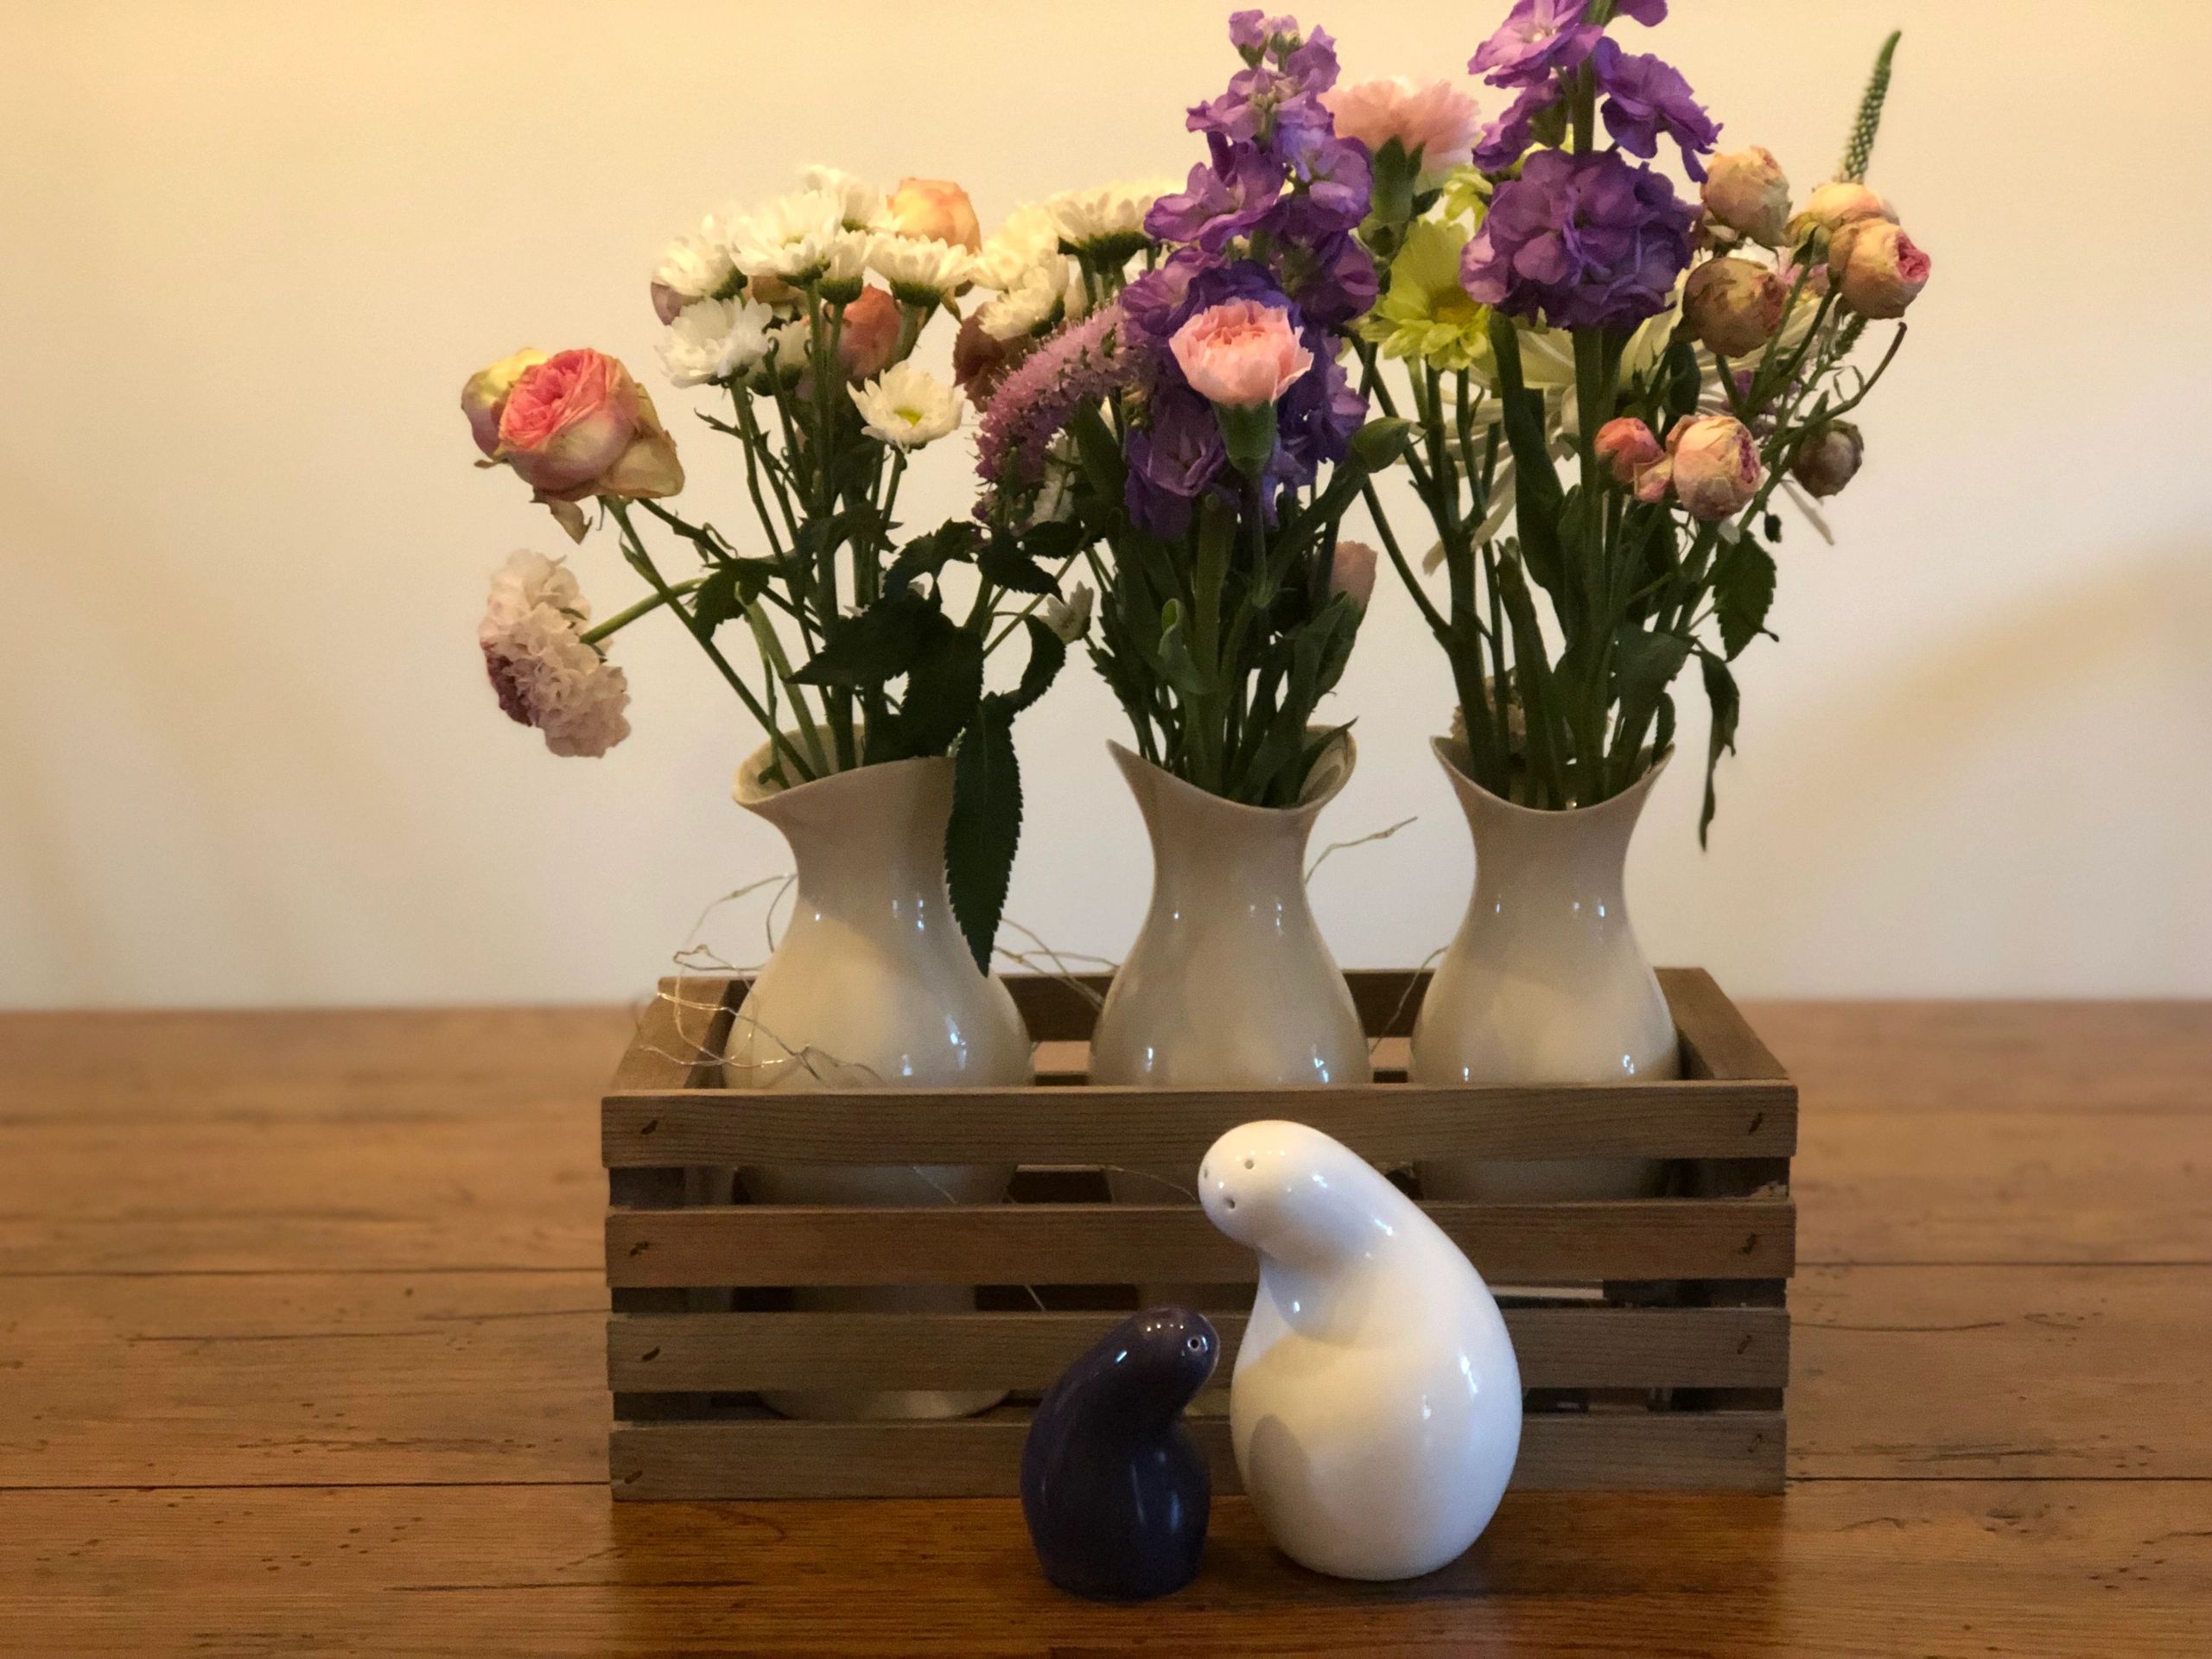 Single Bud Vases with Limited Edition Purple Baby Town and Country Shaker Set (no longer available).